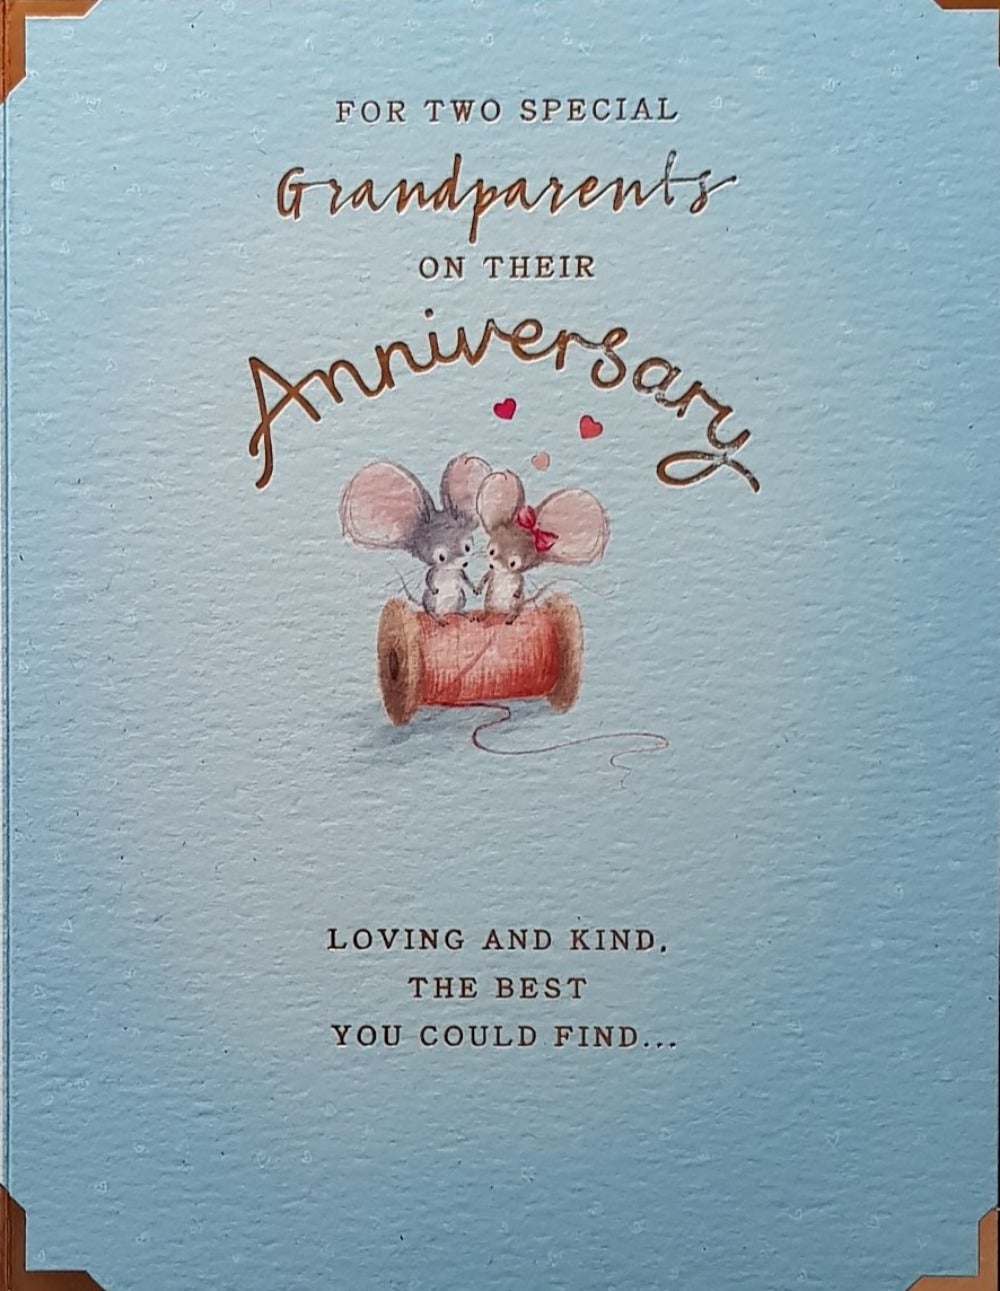 Anniversary Card - Grandparents / Two Mice In Love Sitting On A Spool Of Thread